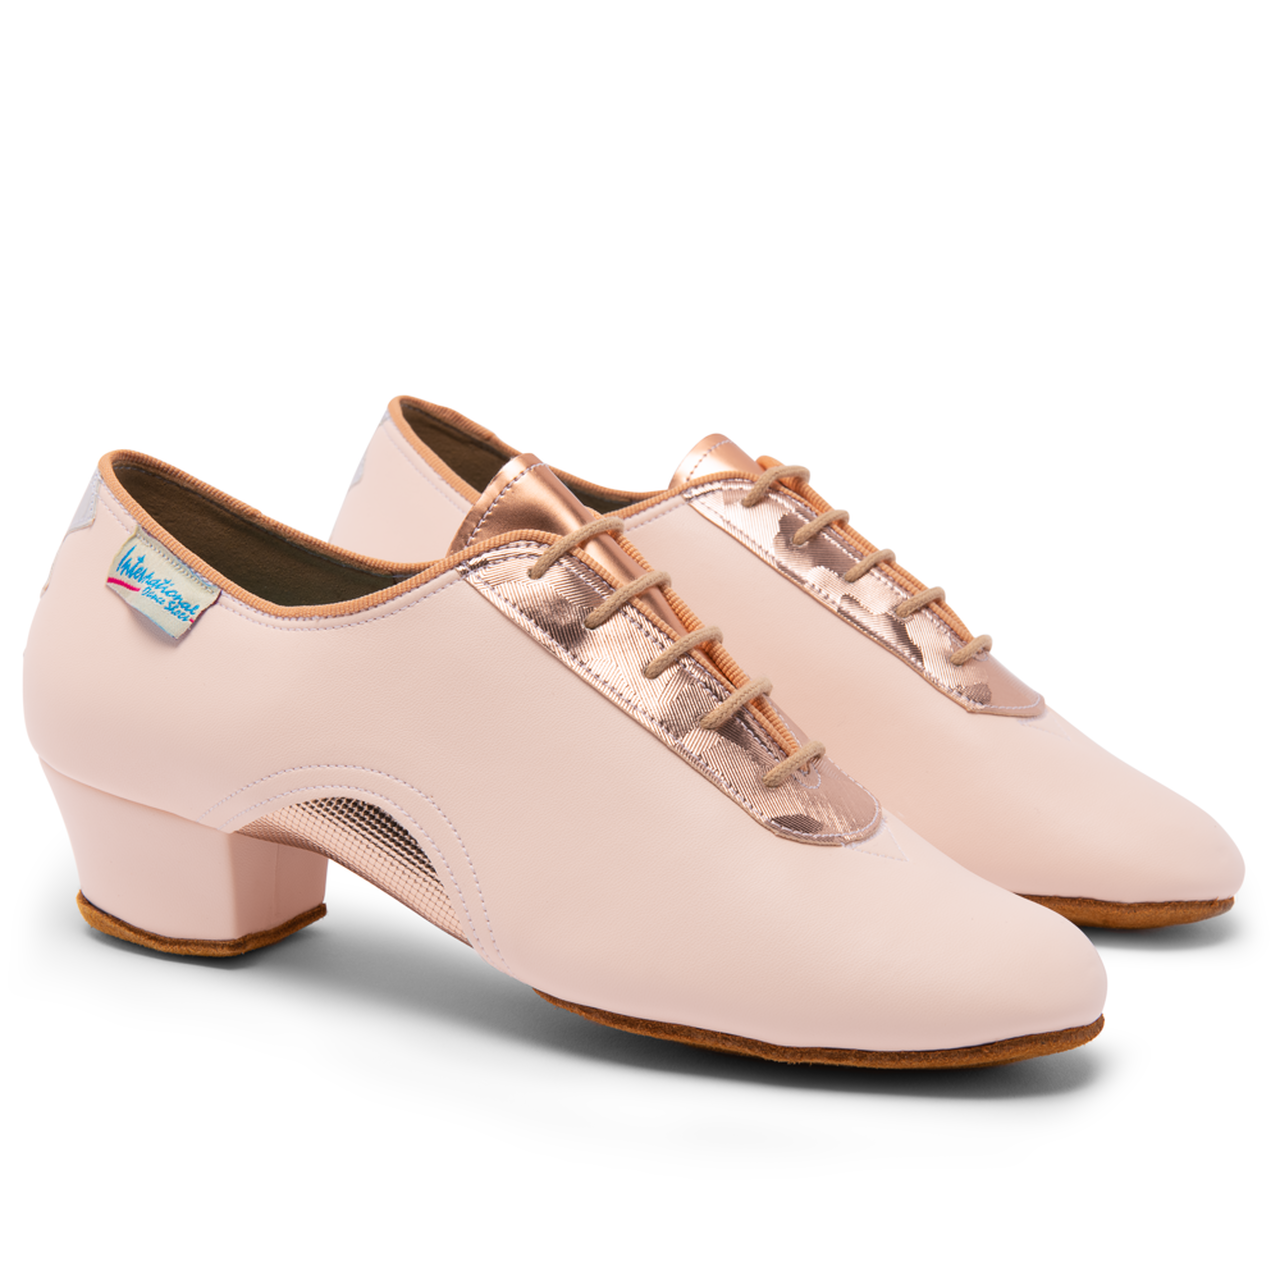 International Dance Shoes IDS Artiste SS Himalayan Rose Teaching/Practice Shoe with Metallic Rose Gold Accents